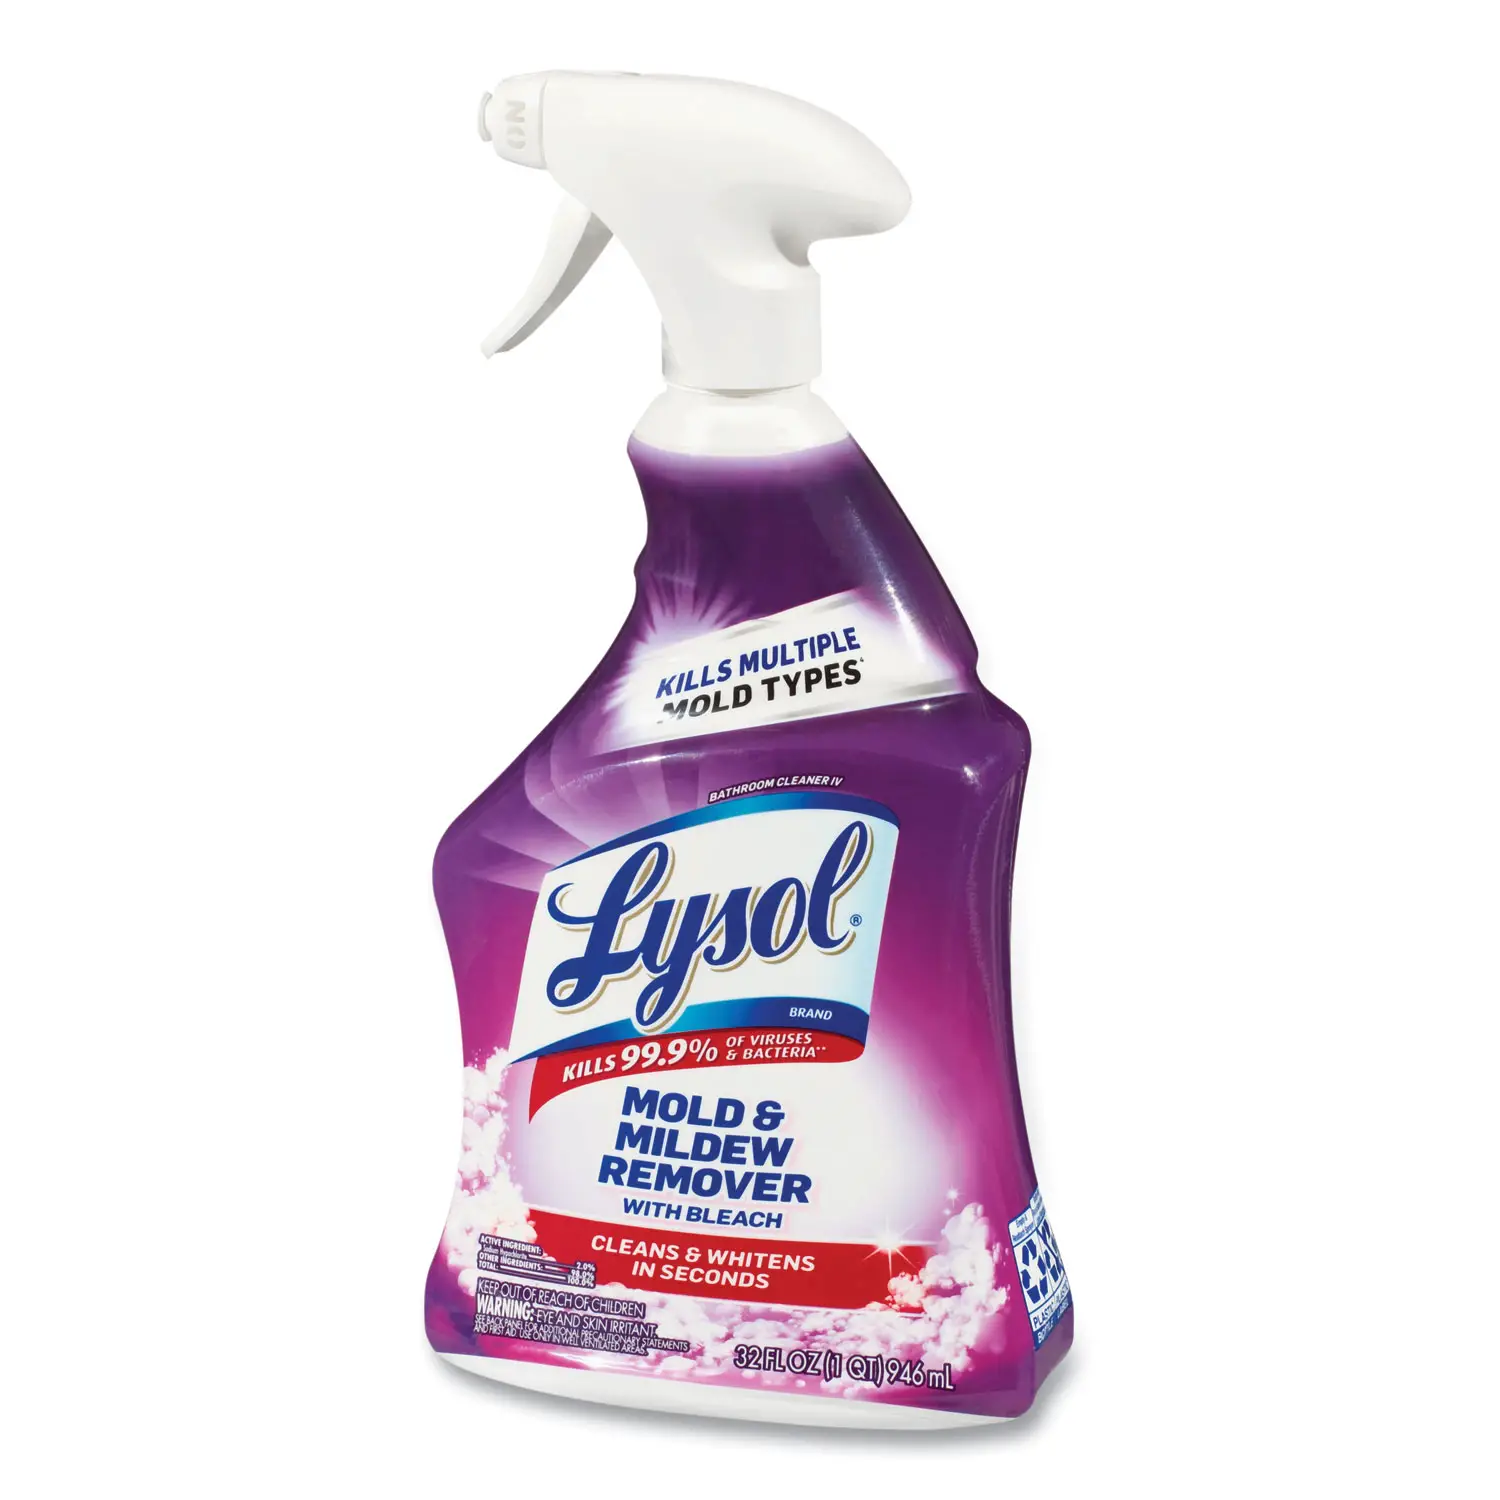 LYSOLÂ® Brand Mold and Mildew Remover with Bleach, 32 oz Spray Bottle ...